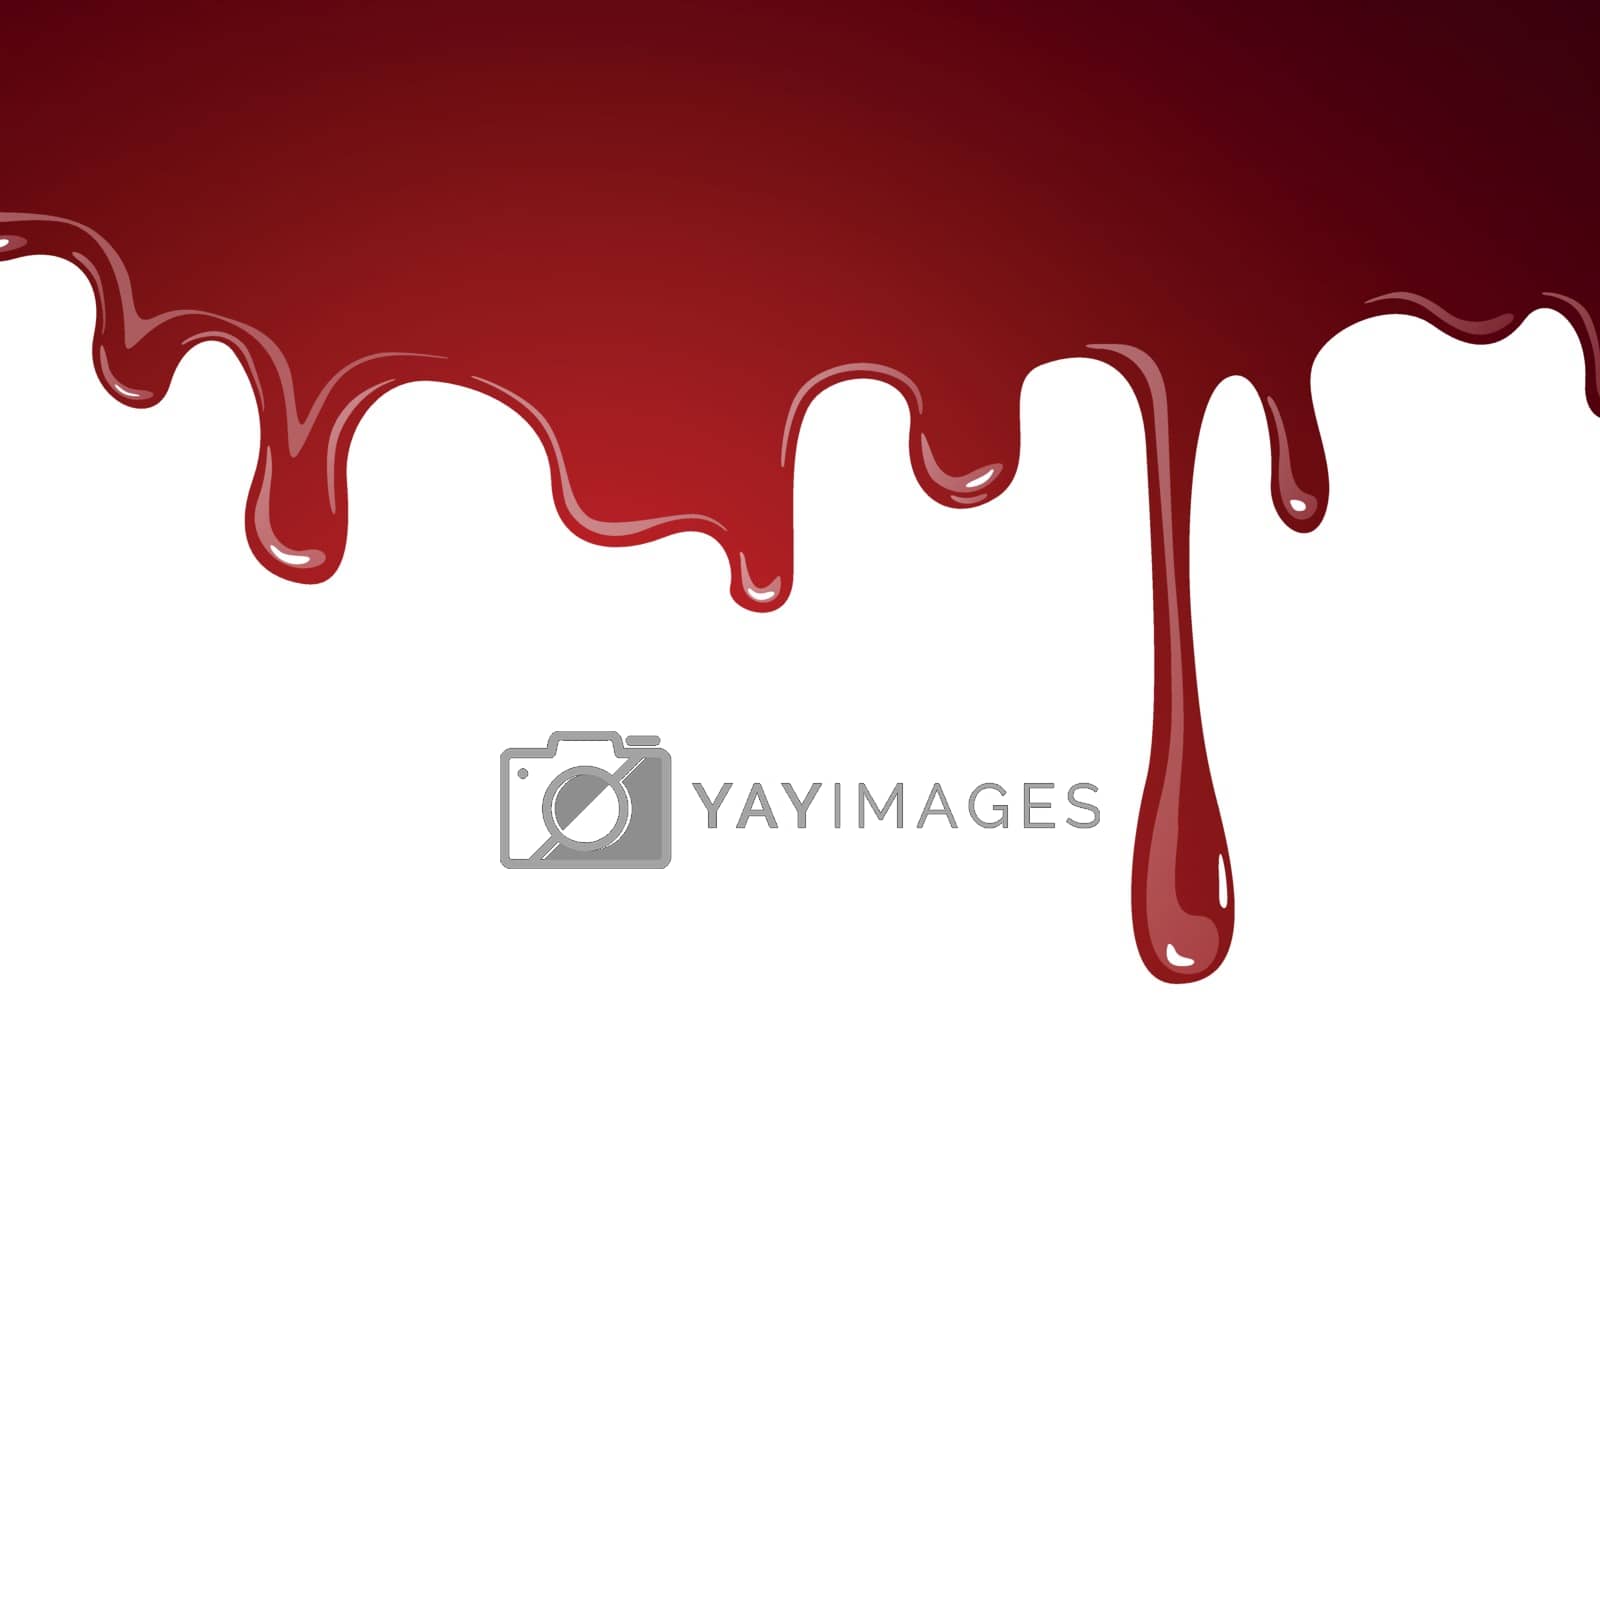 Royalty free image of Blood elements by kartyl